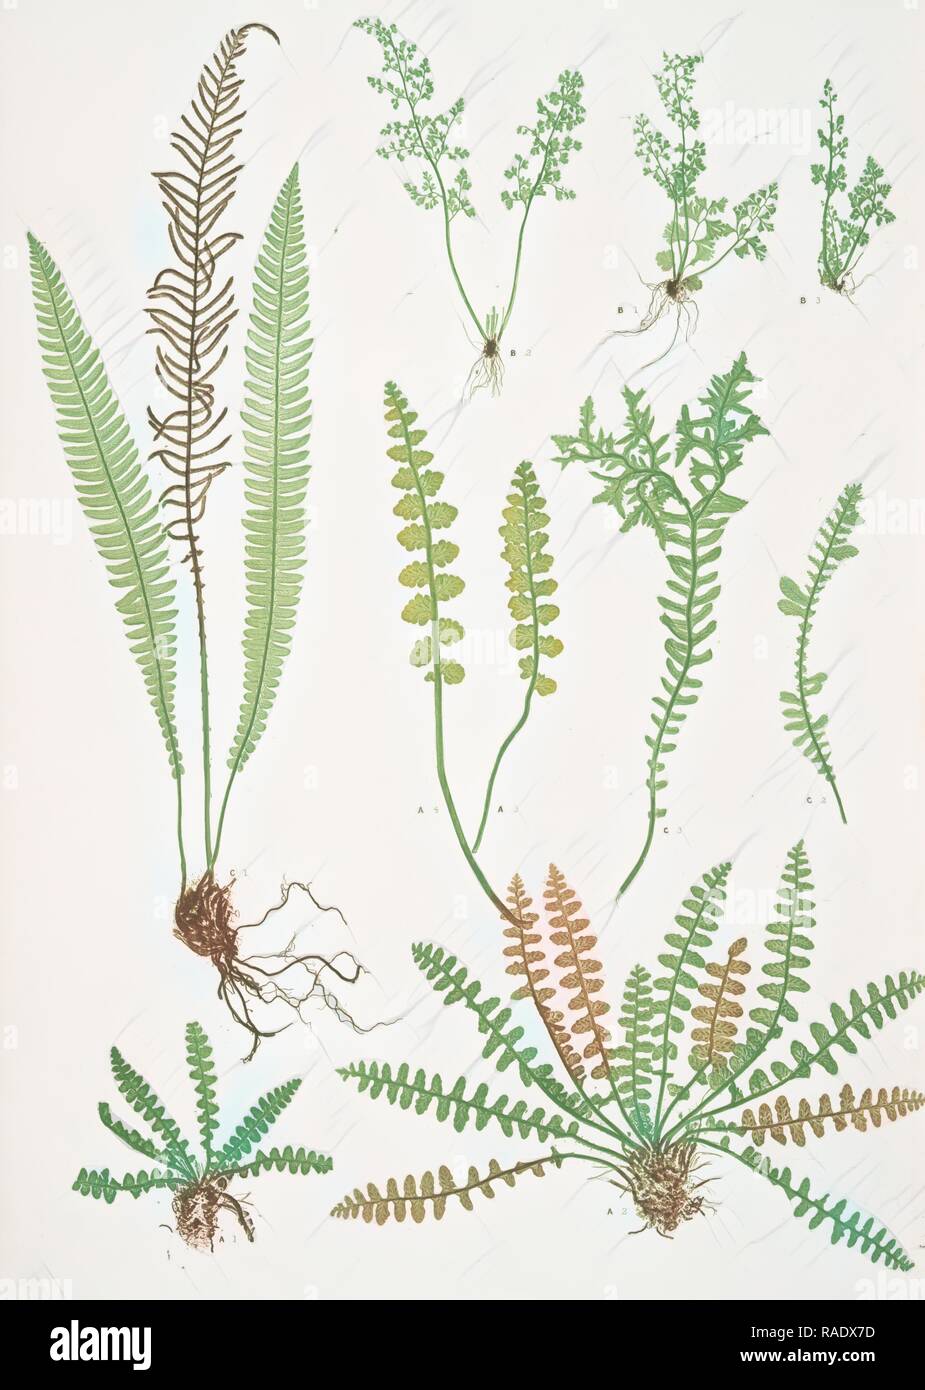 A. Ceterach officinarum. B. Gymnogramma leptophylla. C. Blechnum spicant. The scale fern, Scaly spleenwort, The small reimagined Stock Photo